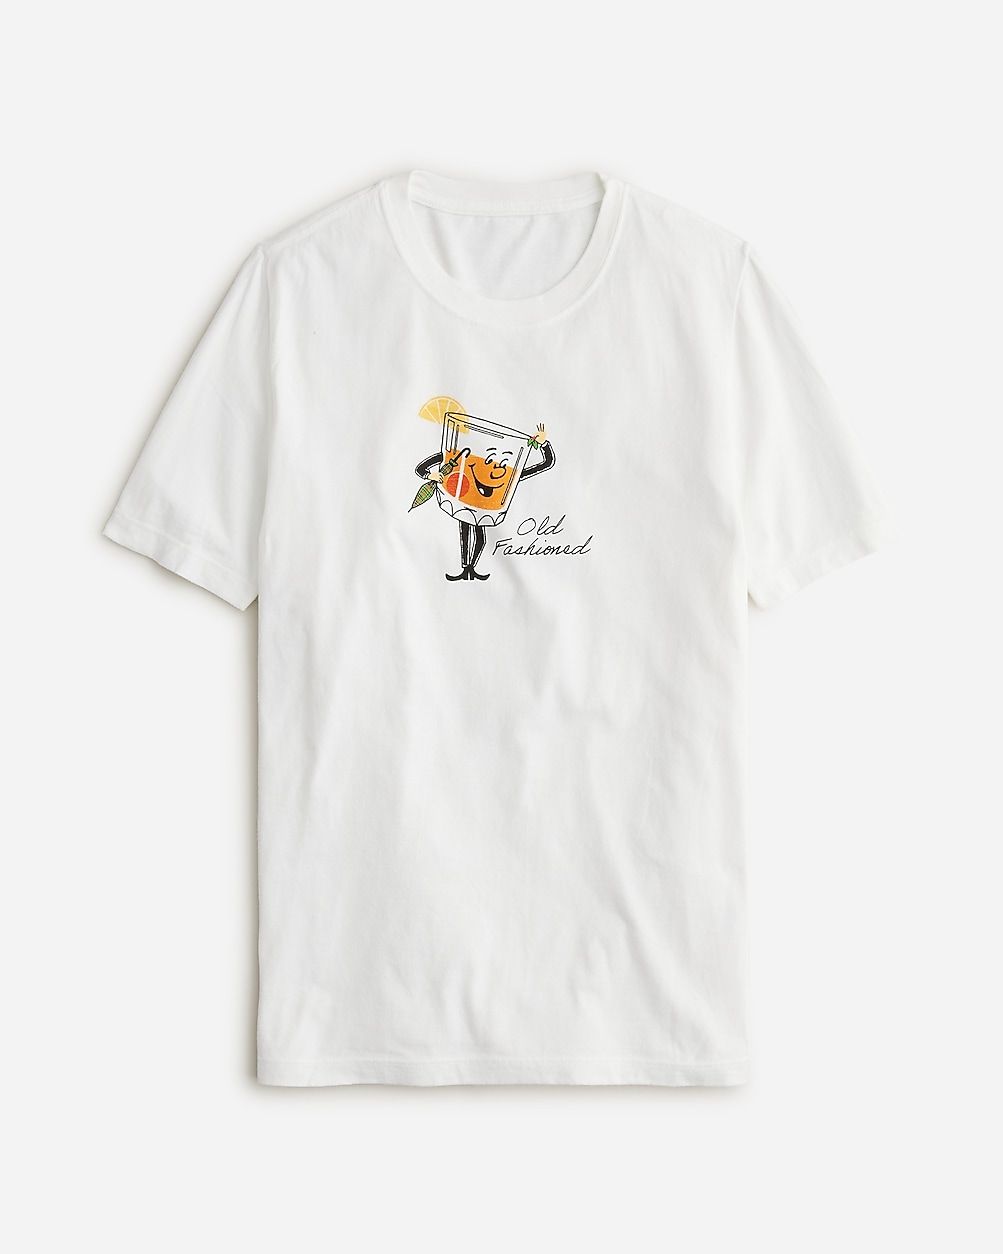 Made-in-the-USA old-fashioned graphic T-shirt | J.Crew US